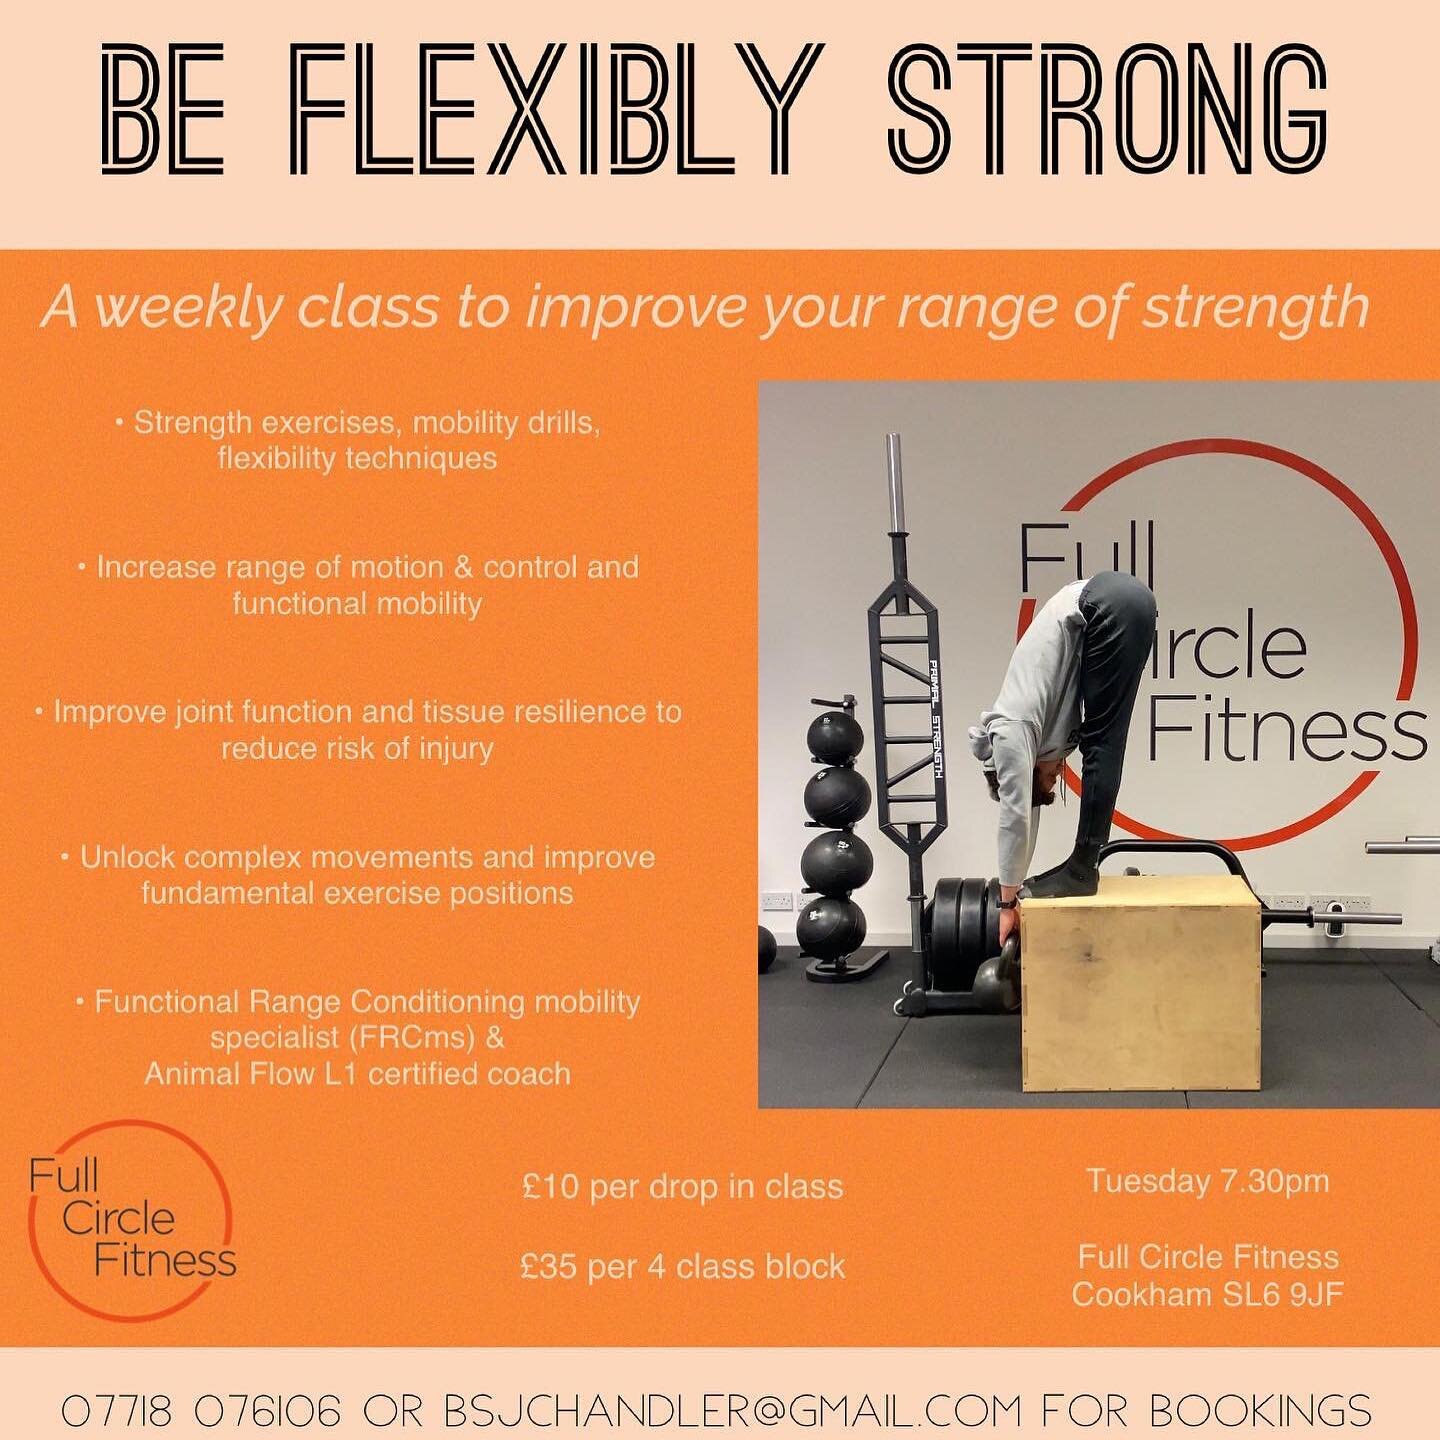 Class continuing tomorrow evening at @fullcirclefitness.cookham.

Come and learn how stretch, strengthen and move for a healthy, happy body.

DM, bsjchandler@gmail.com, 07718 076106

#fitnesscoach #mobilitycoach #mobility #flexibility #fitnessclass #